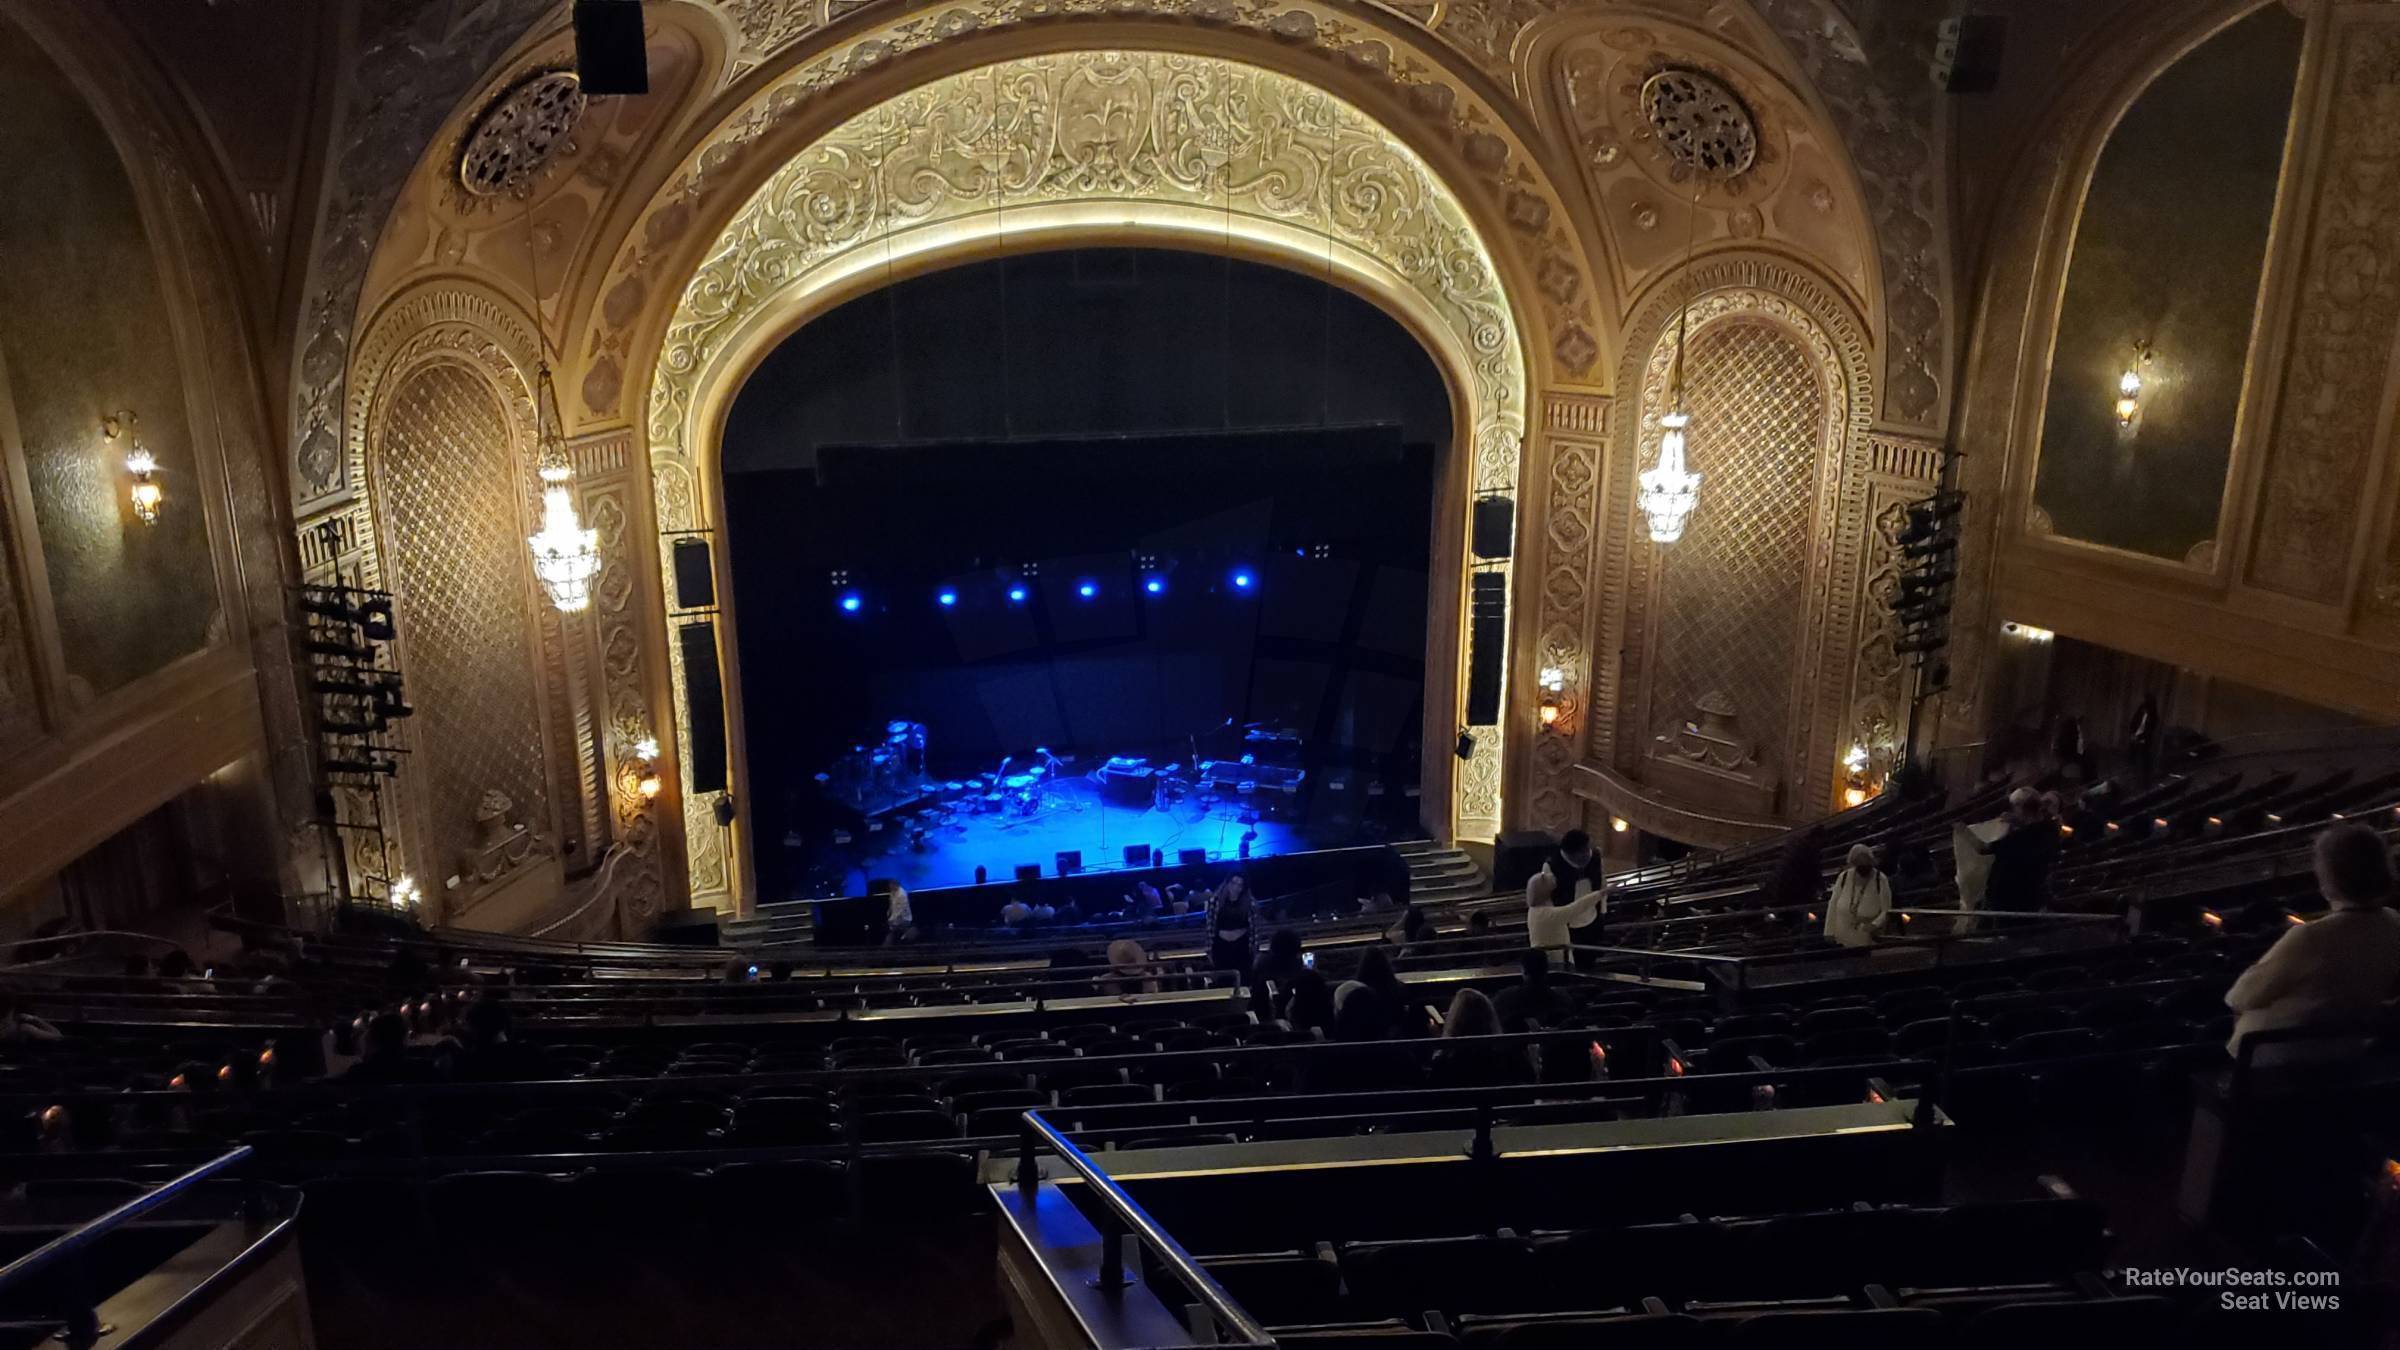 section 34, row y seat view  - paramount theatre - seattle